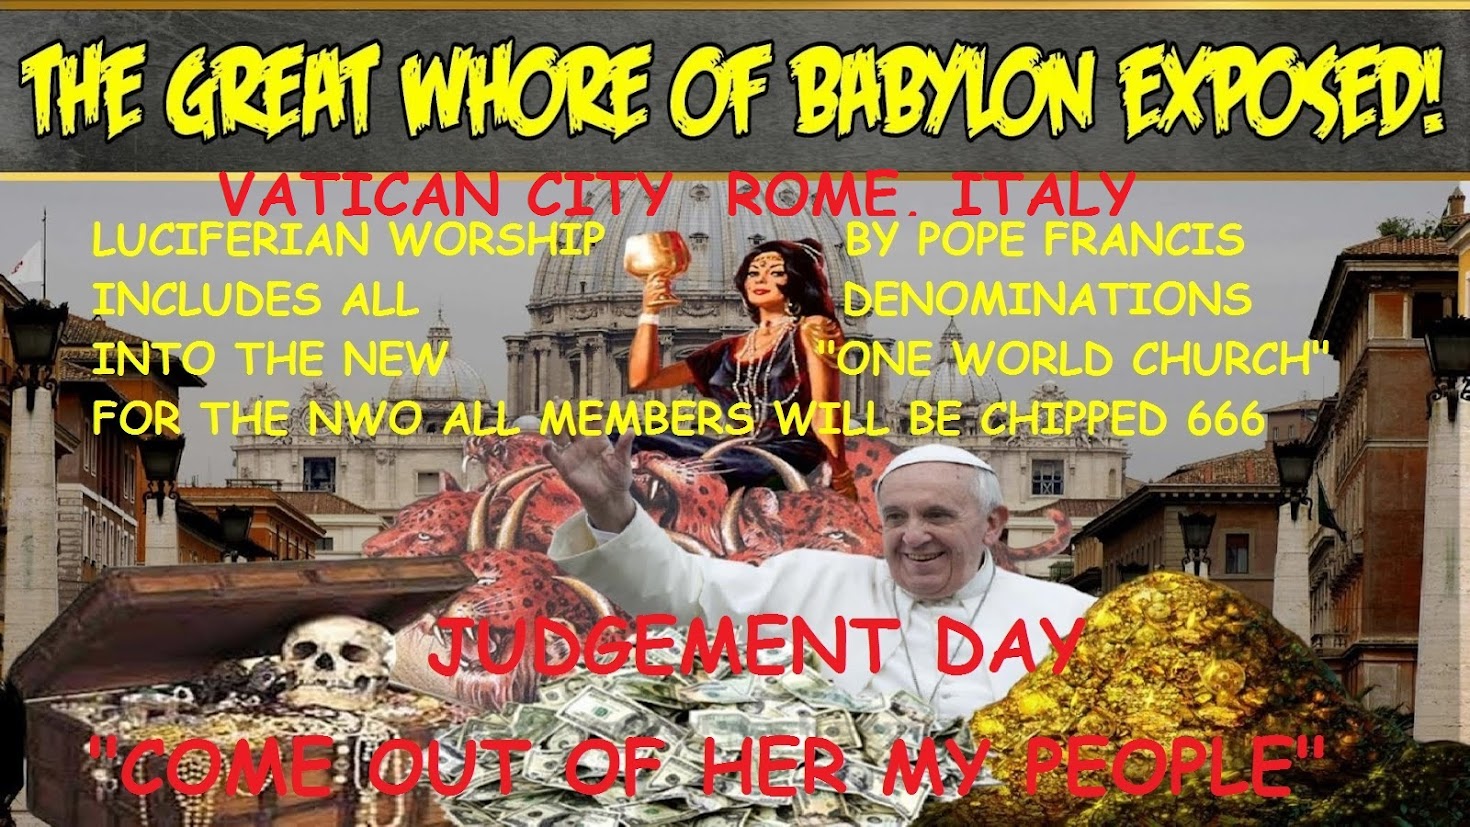 THE GREAT WHORE OF BABYLON EXPOSED!